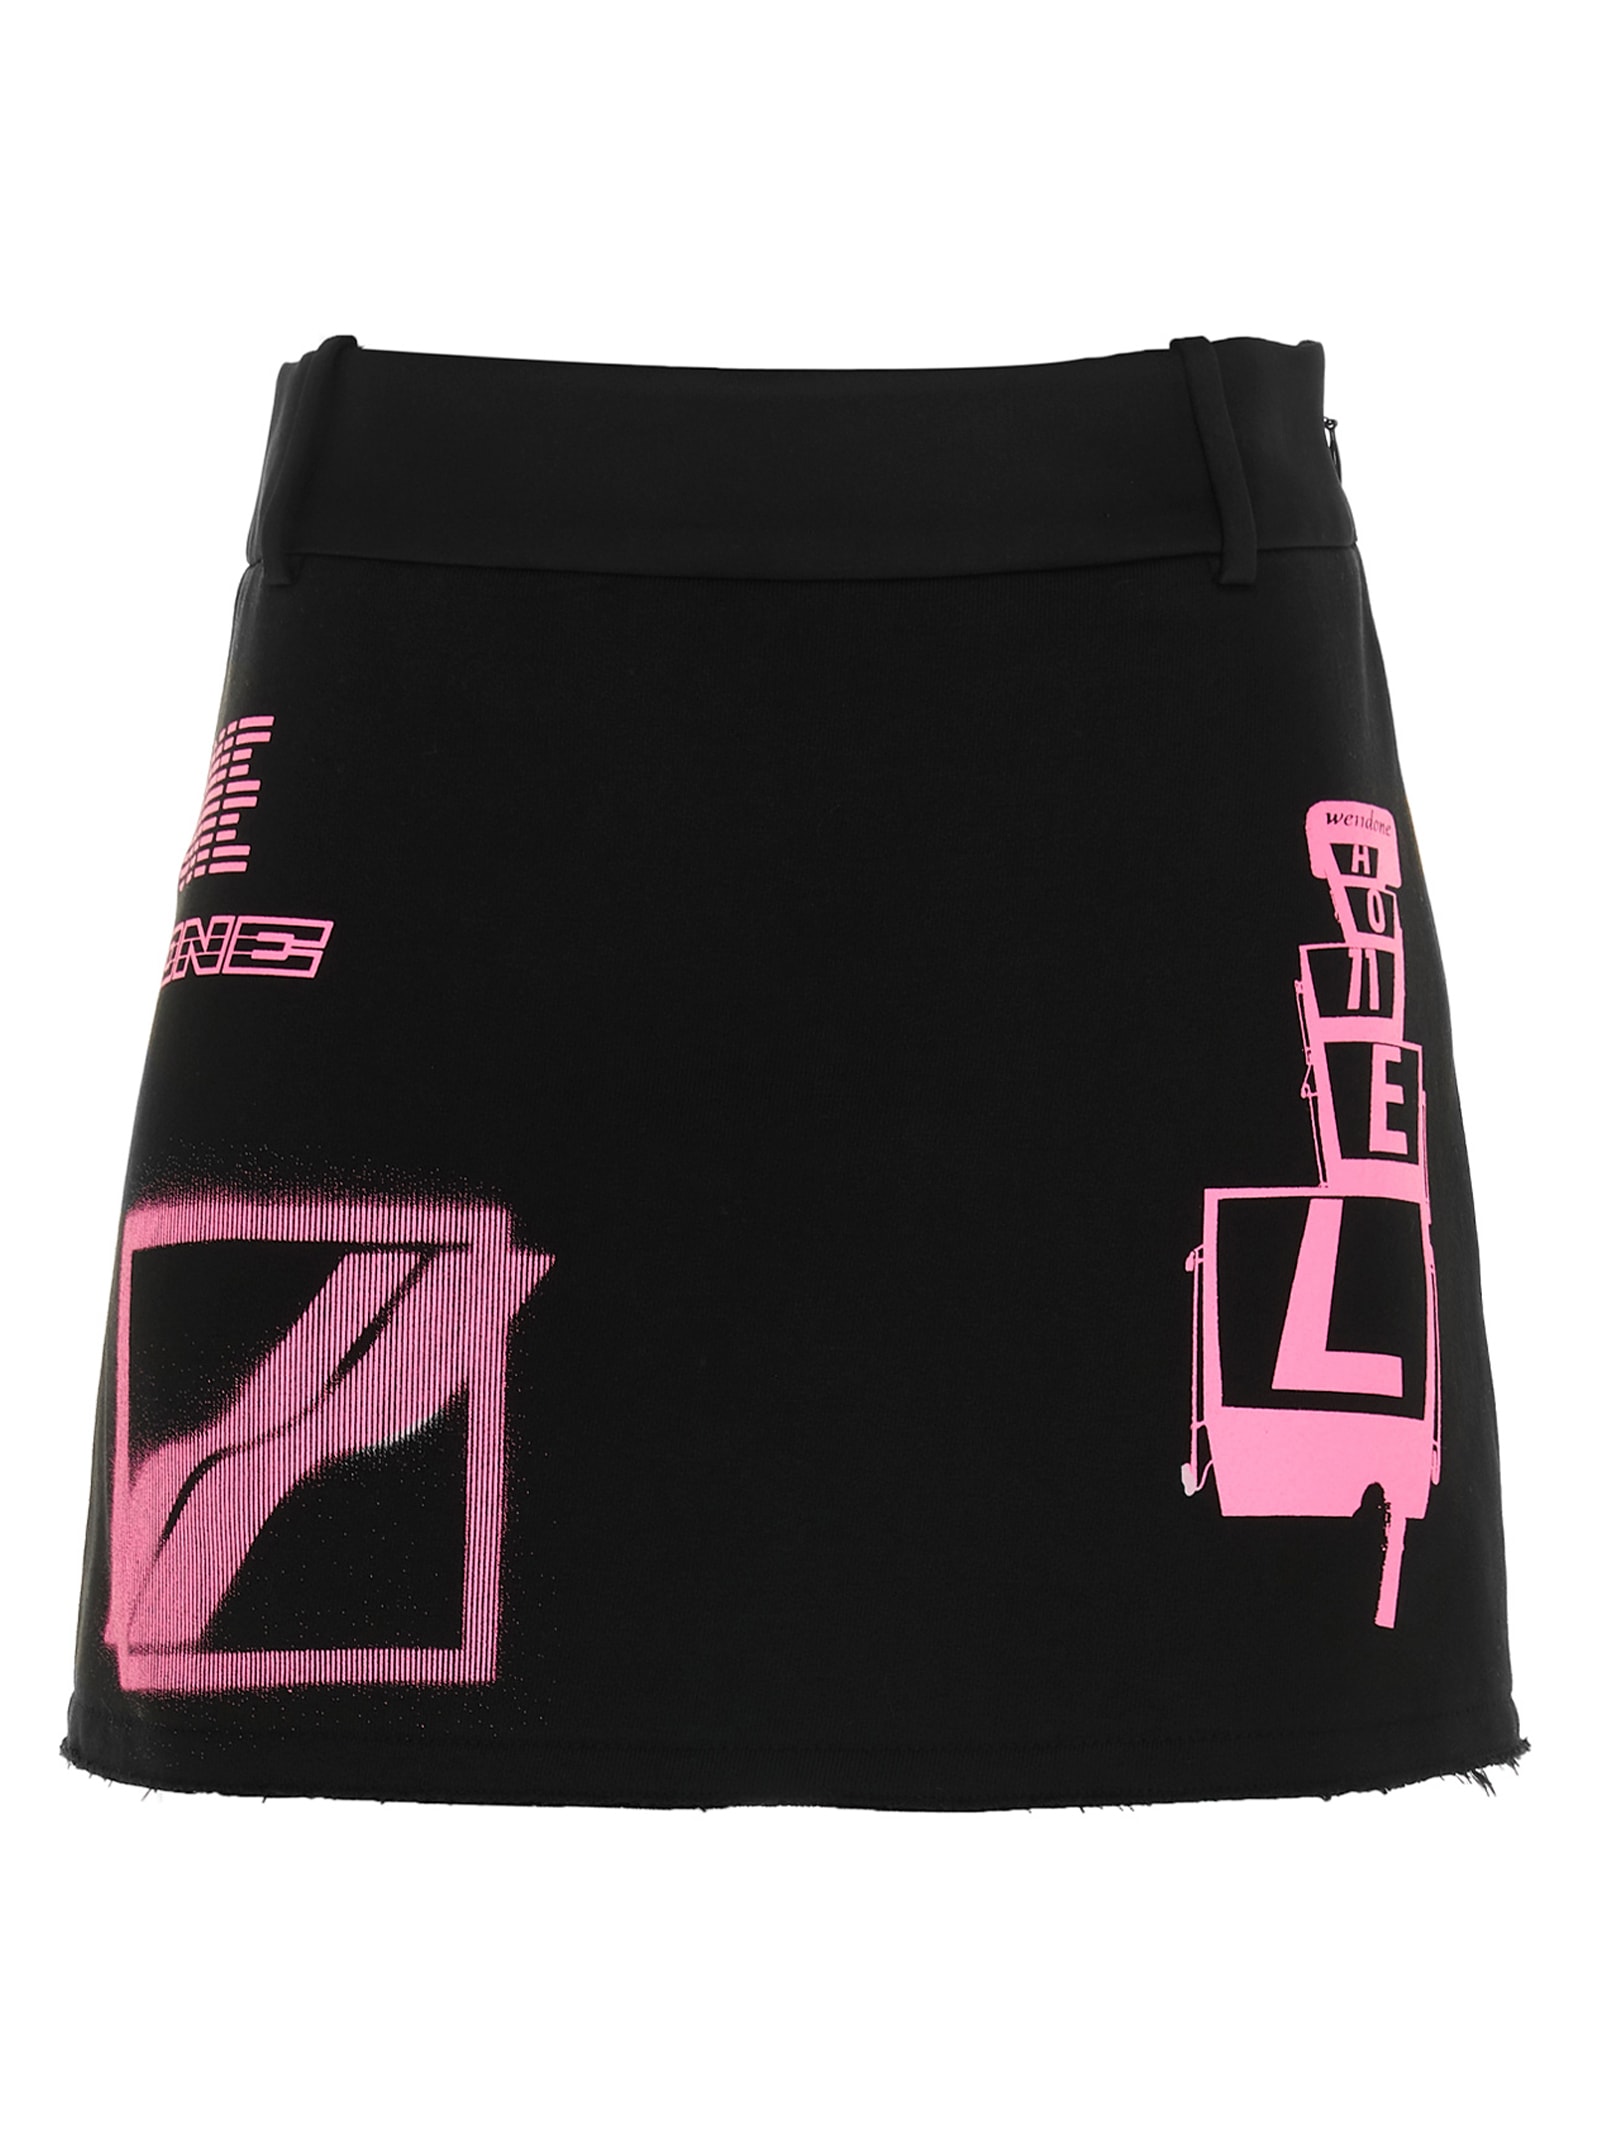 We11 Done Skirt